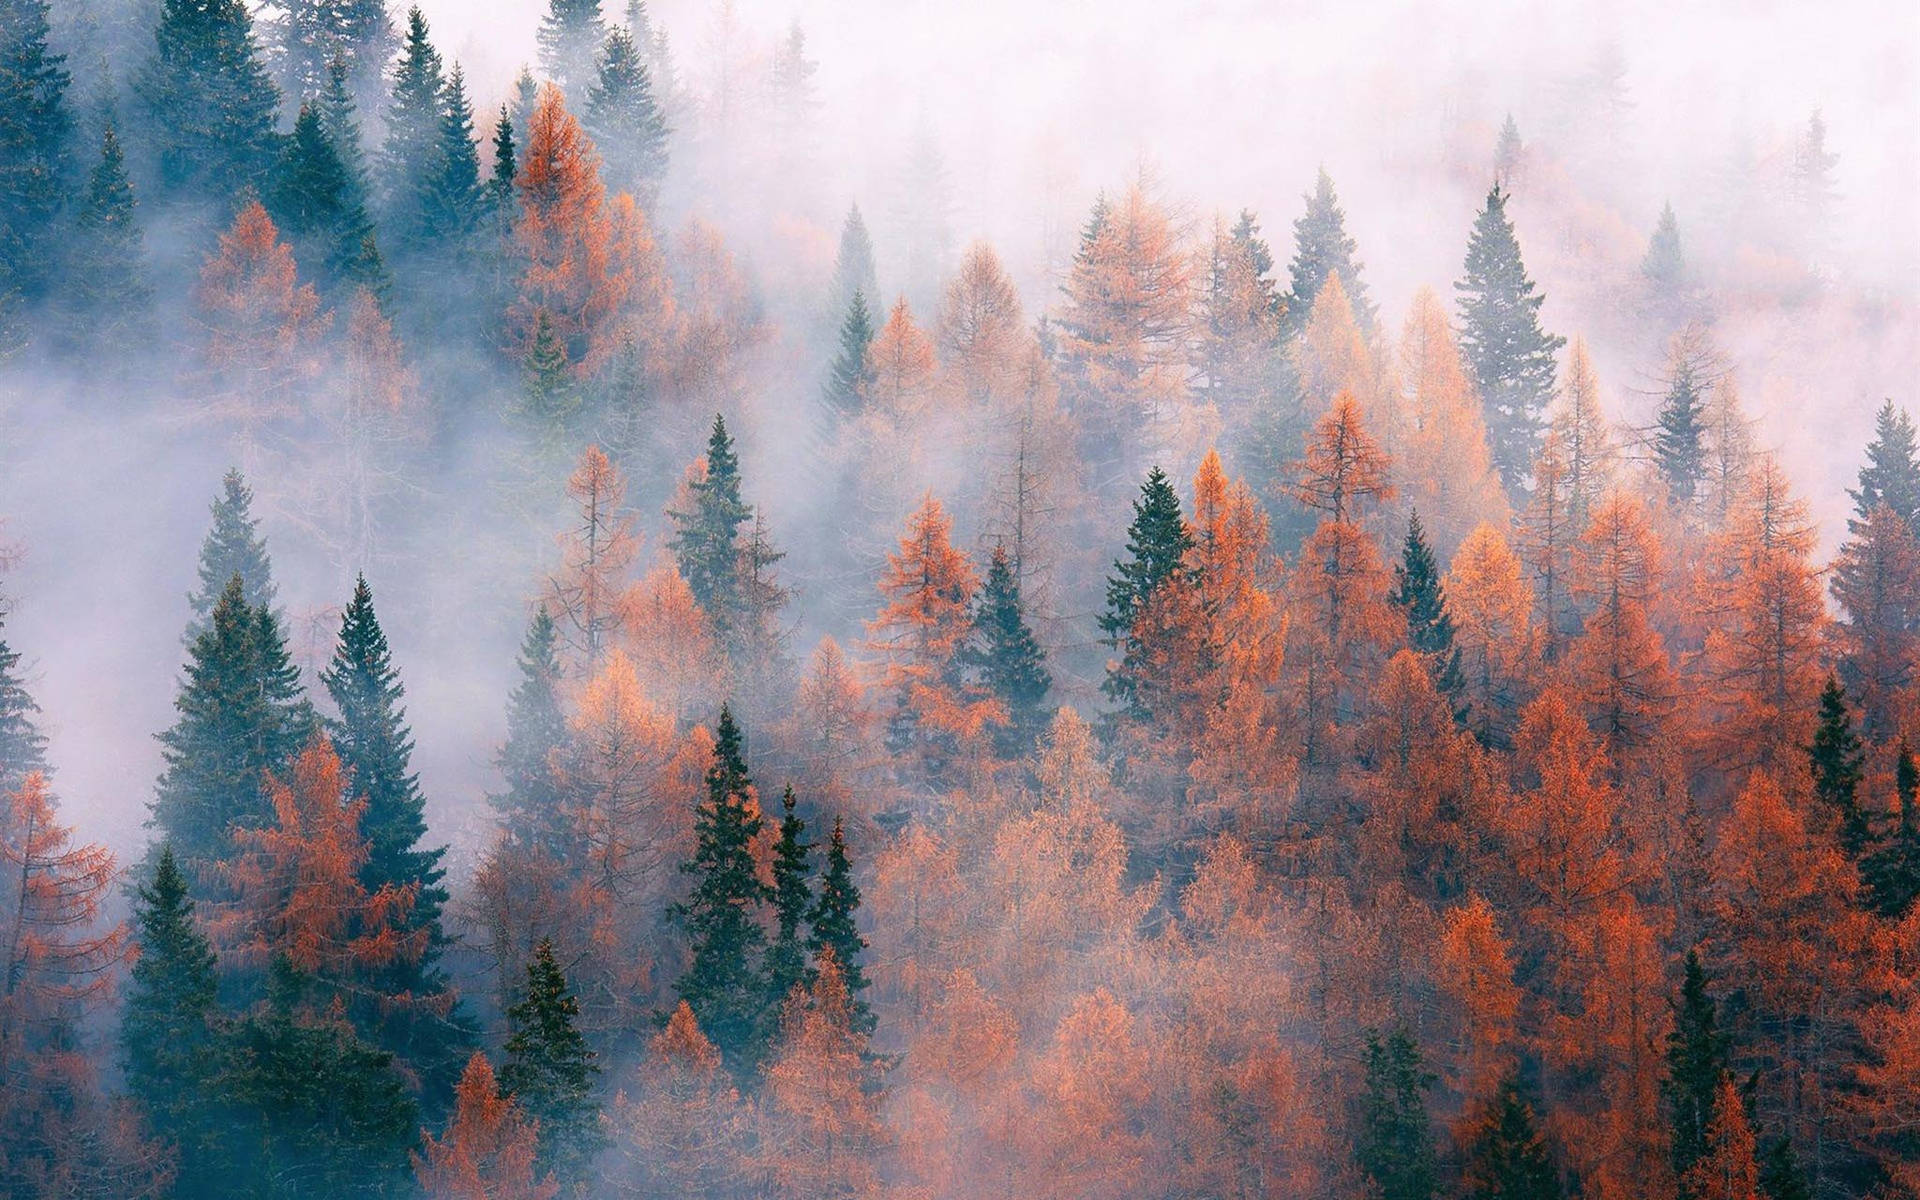 Enchanted Autumn - Foggy Pine Forest Wallpaper